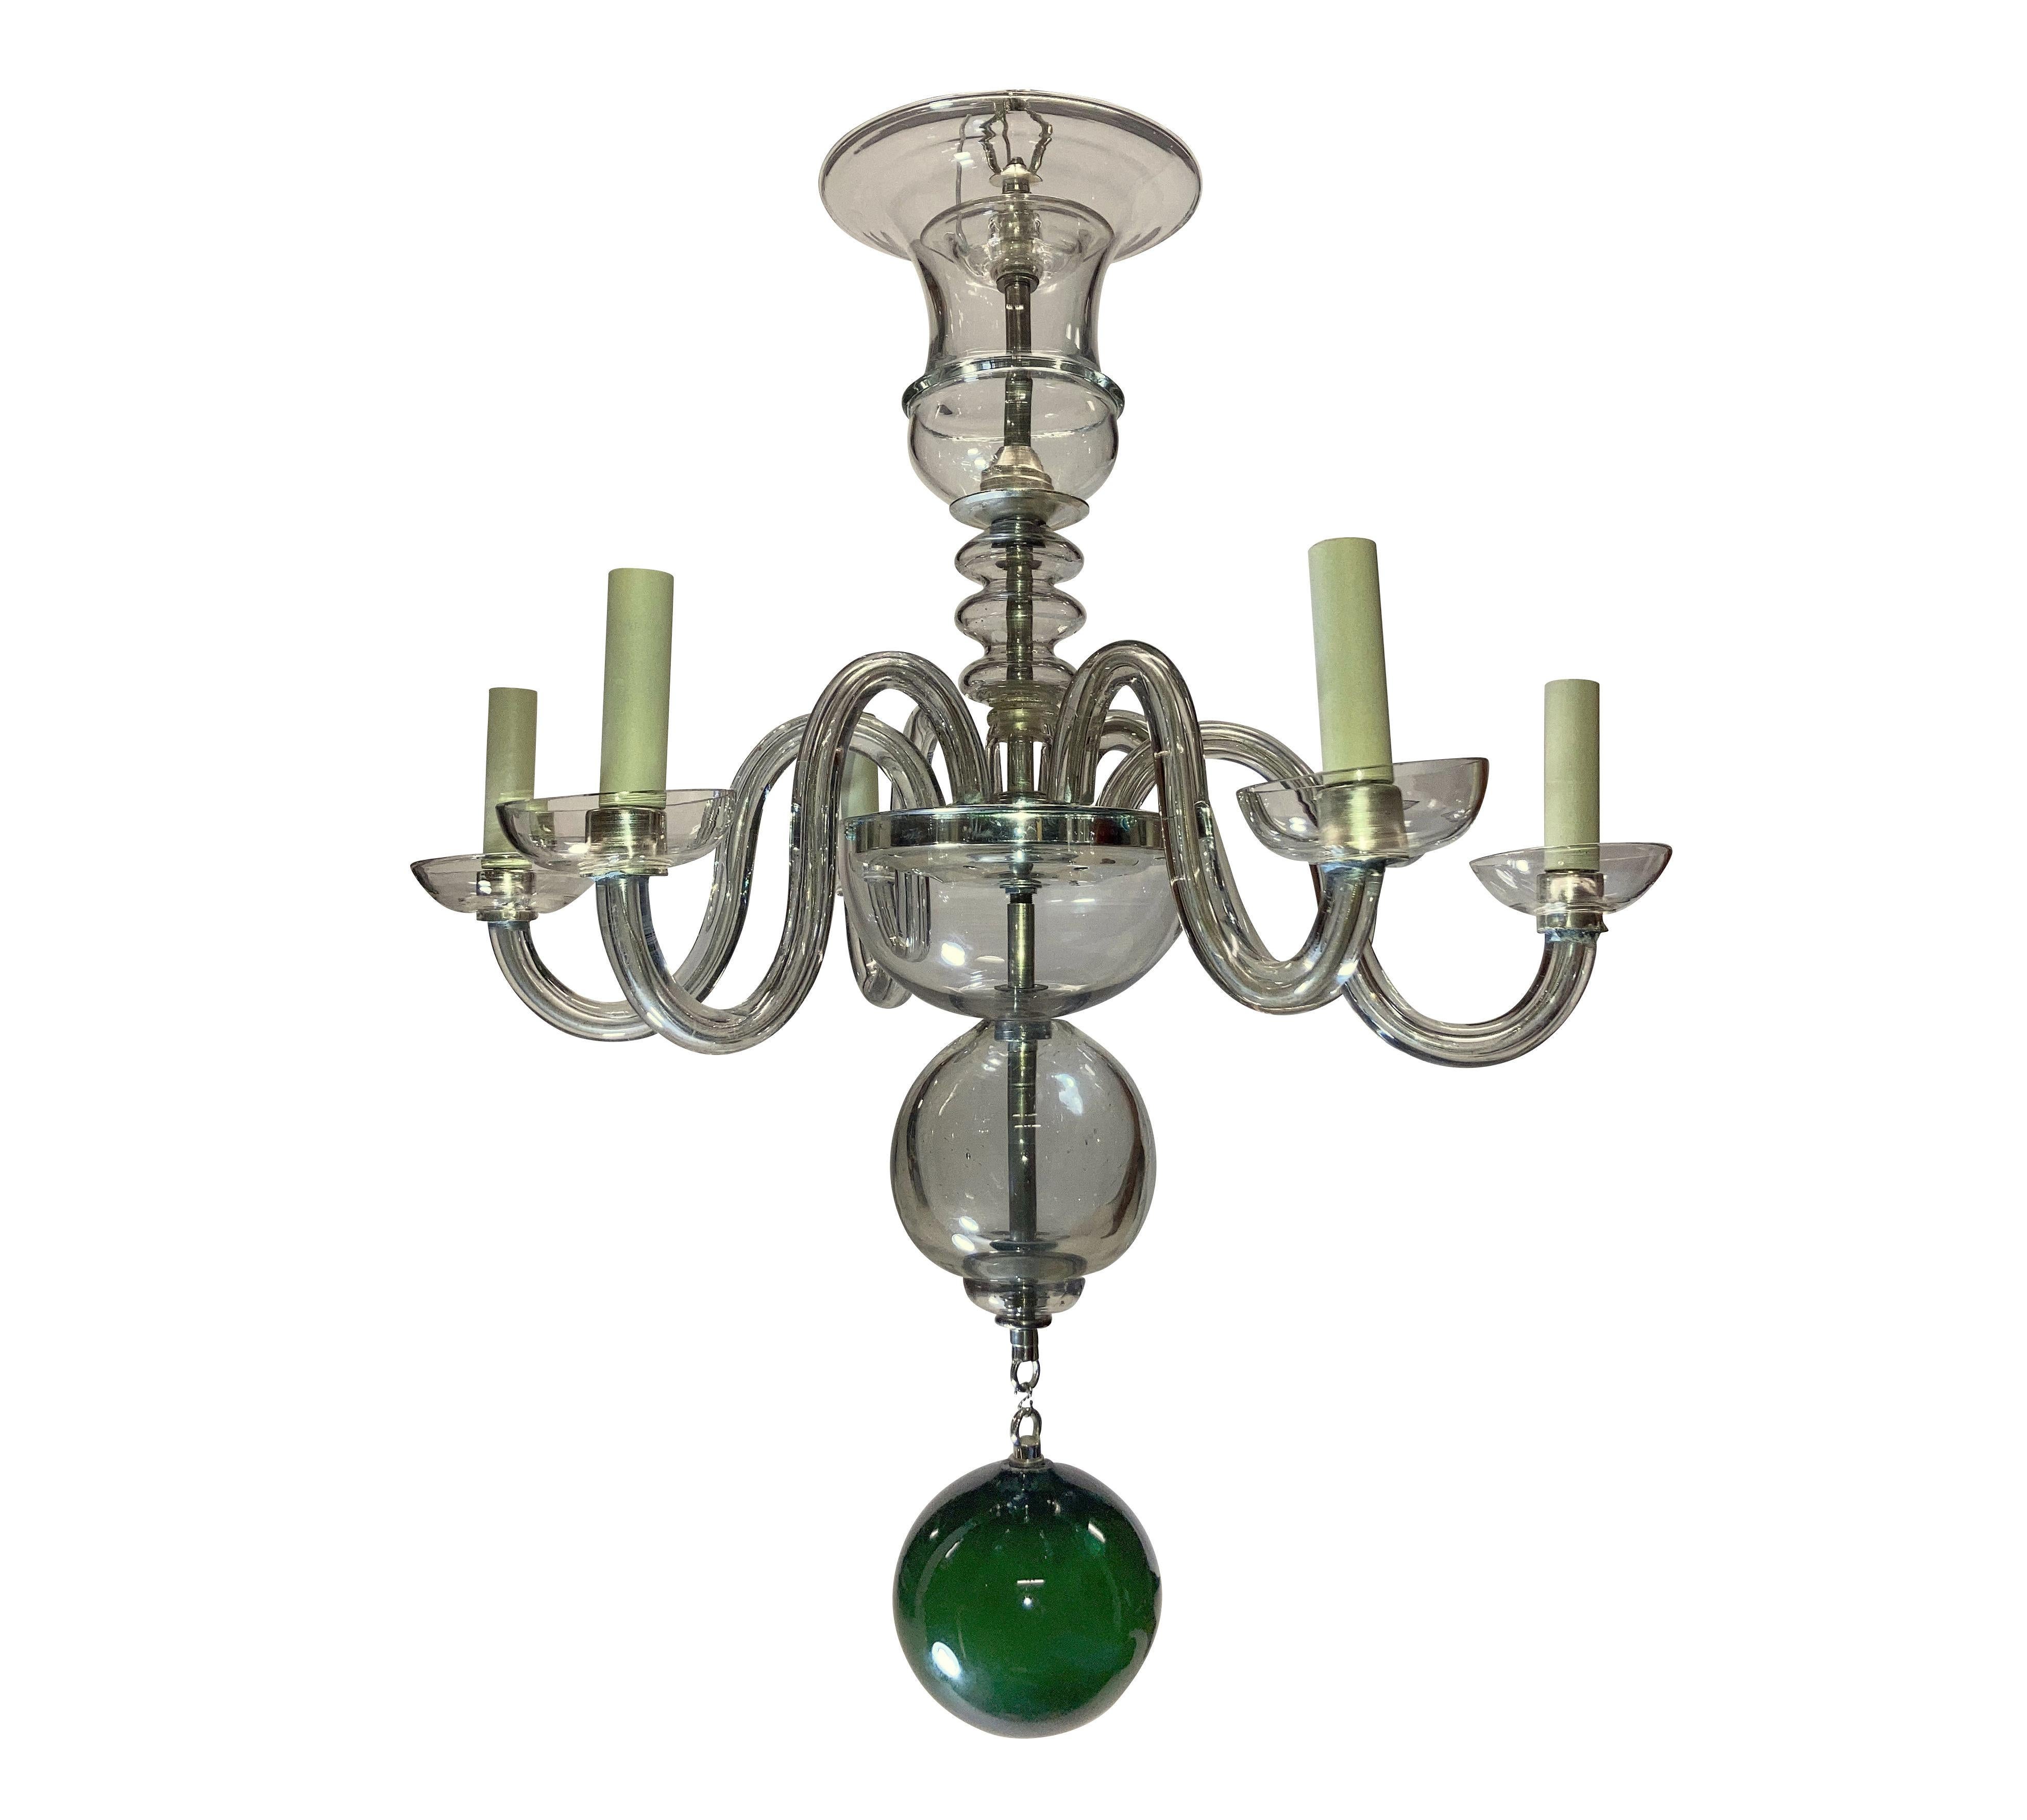 A stylish Venetian chandelier of six arms in hand blown glass, with a large emerald green pendant ball.